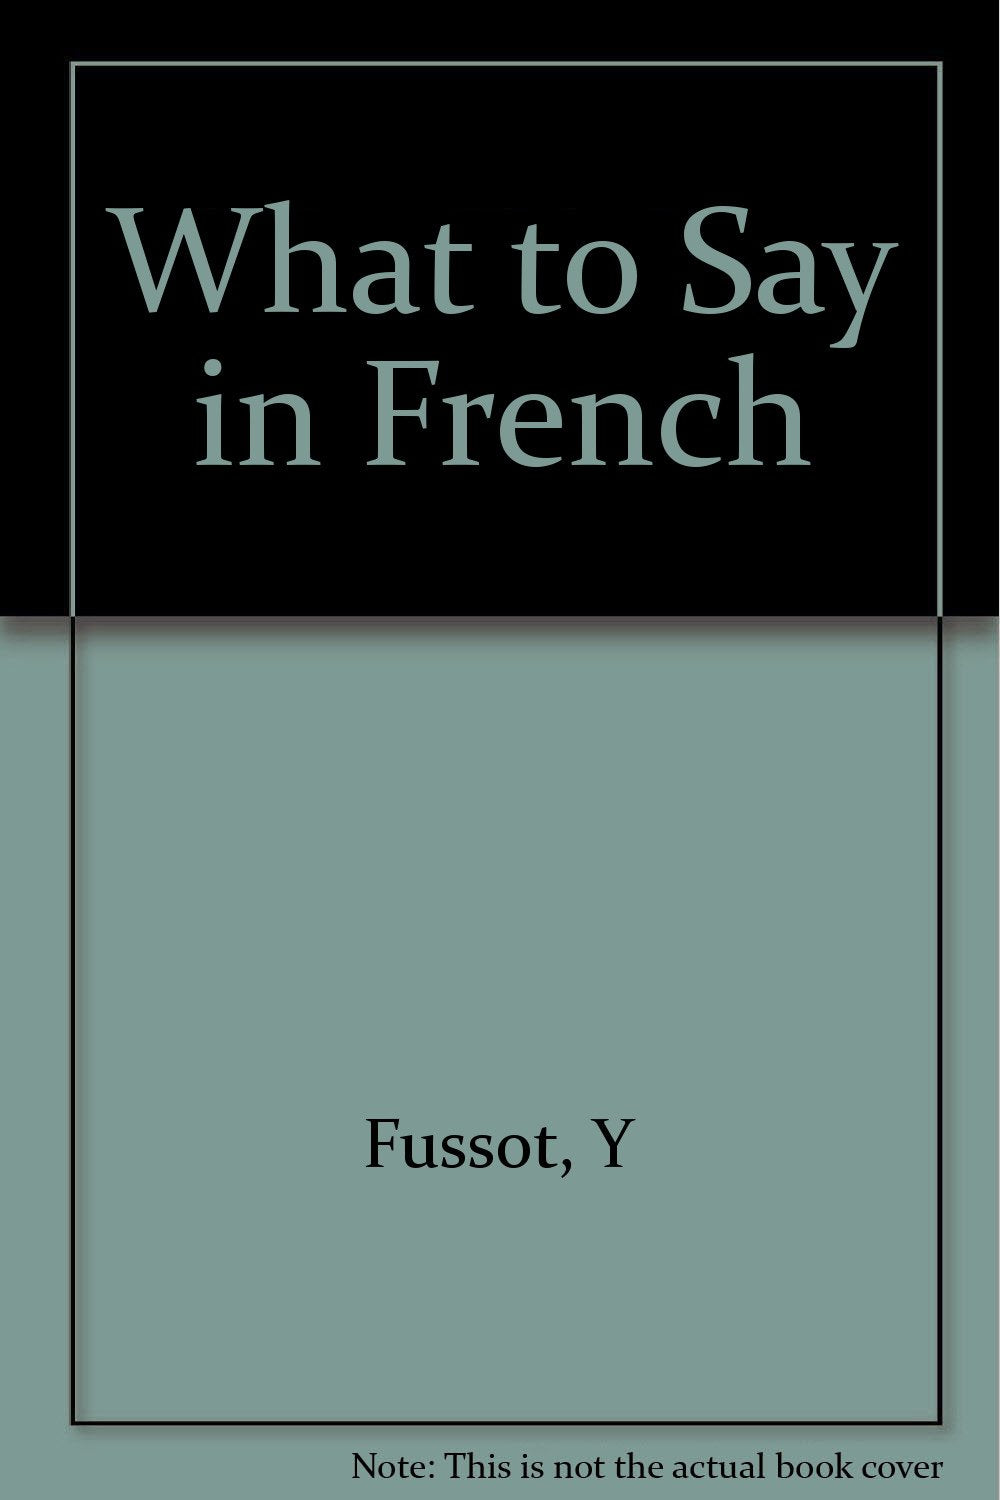 What to Say in French